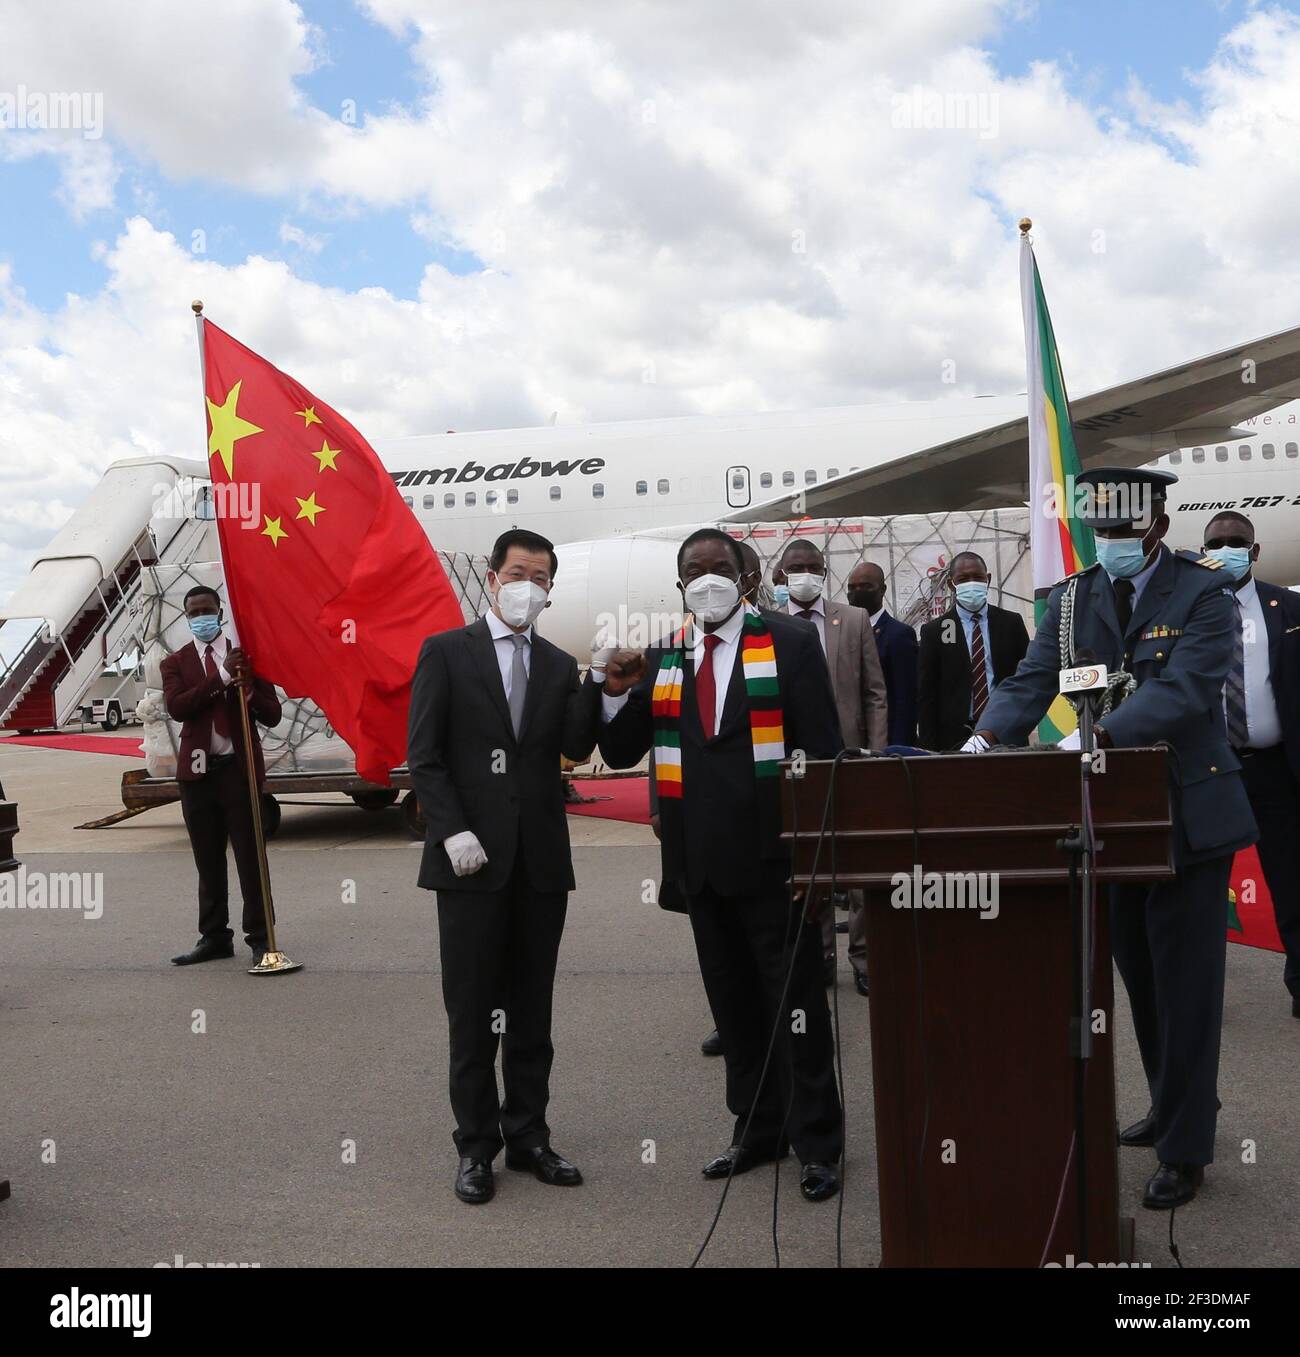 Harare, Zimbabwe. 16th Mar, 2021. Zimbabwean President Emmerson Mnangagwa (2nd L, front) and Chinese Ambassador to Zimbabwe Guo Shaochun (1st L, front) pose for a photo as a batch of COVID-19 vaccines arrive at Robert Gabriel Mugabe International Airport in Harare, Zimbabwe, on March 16, 2021. Zimbabwe on Tuesday received a second batch of Sinopharm doses donated by China plus an additional Sinovac doses commercially procured by the government. Credit: Zhang Yuliang/Xinhua/Alamy Live News Stock Photo